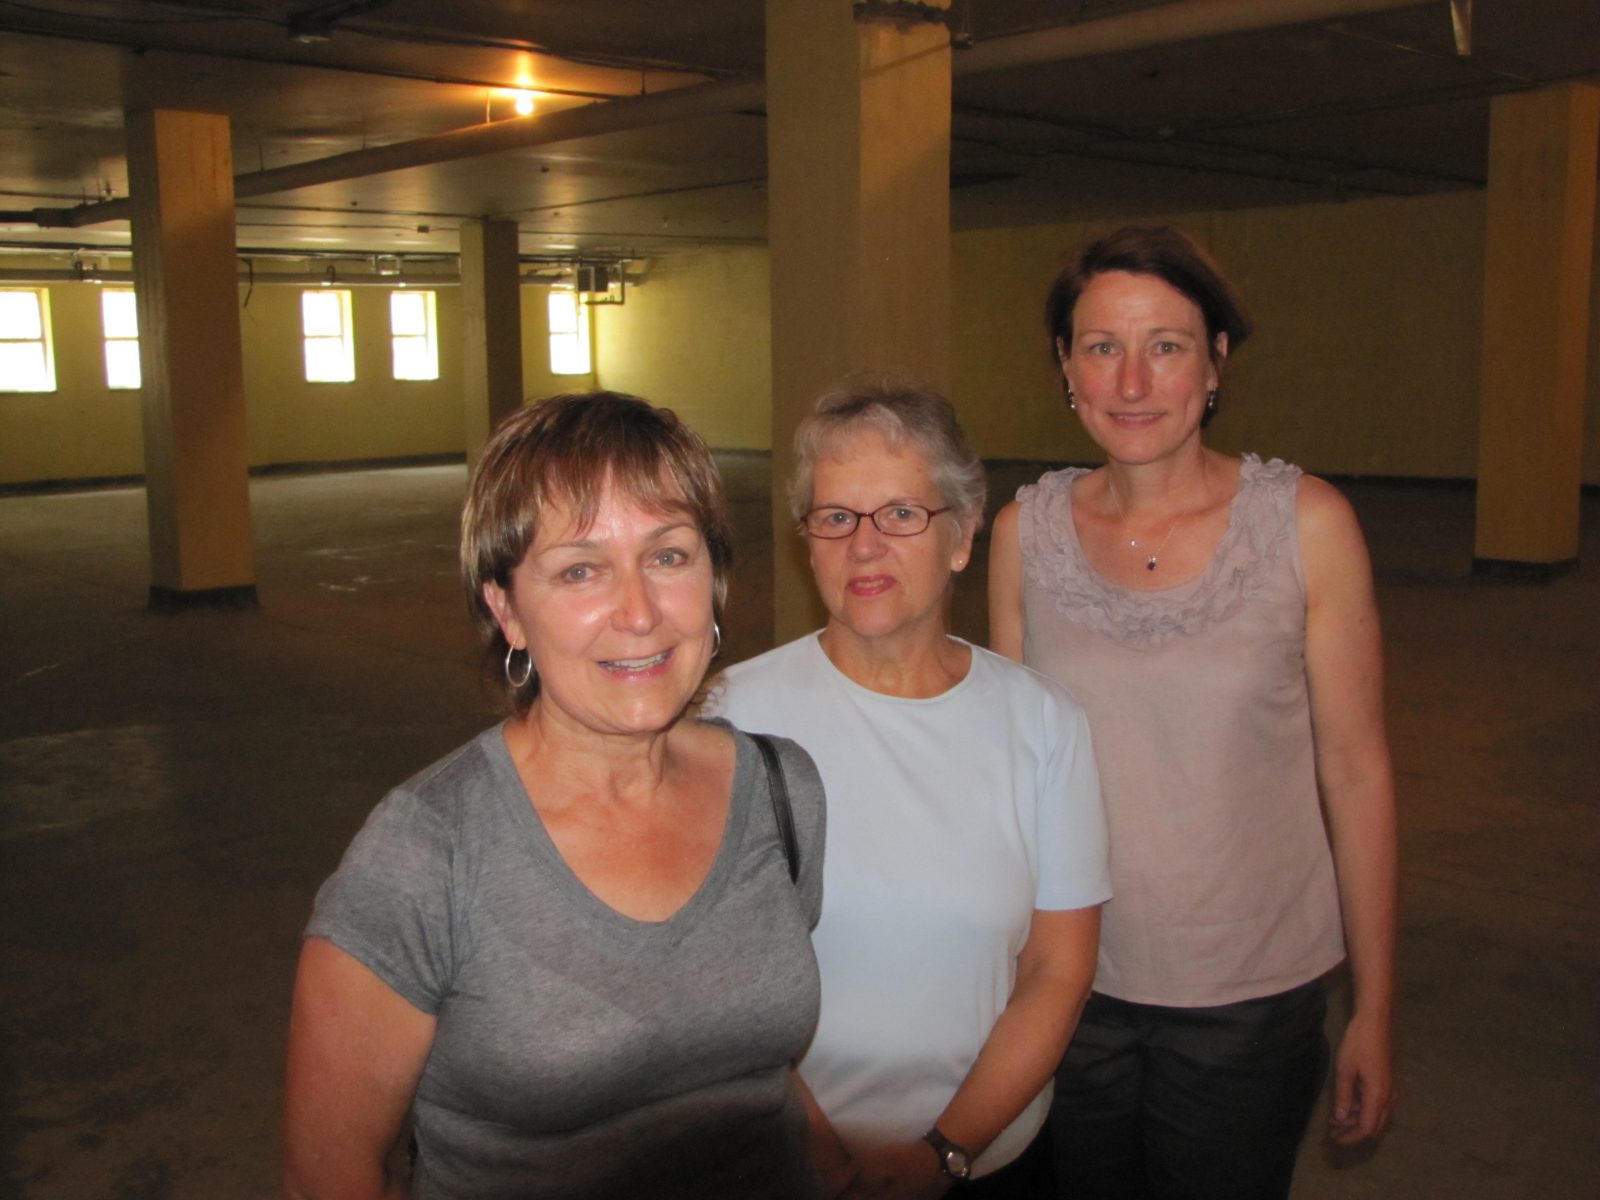 Genealogy group to occupy part of basement at library